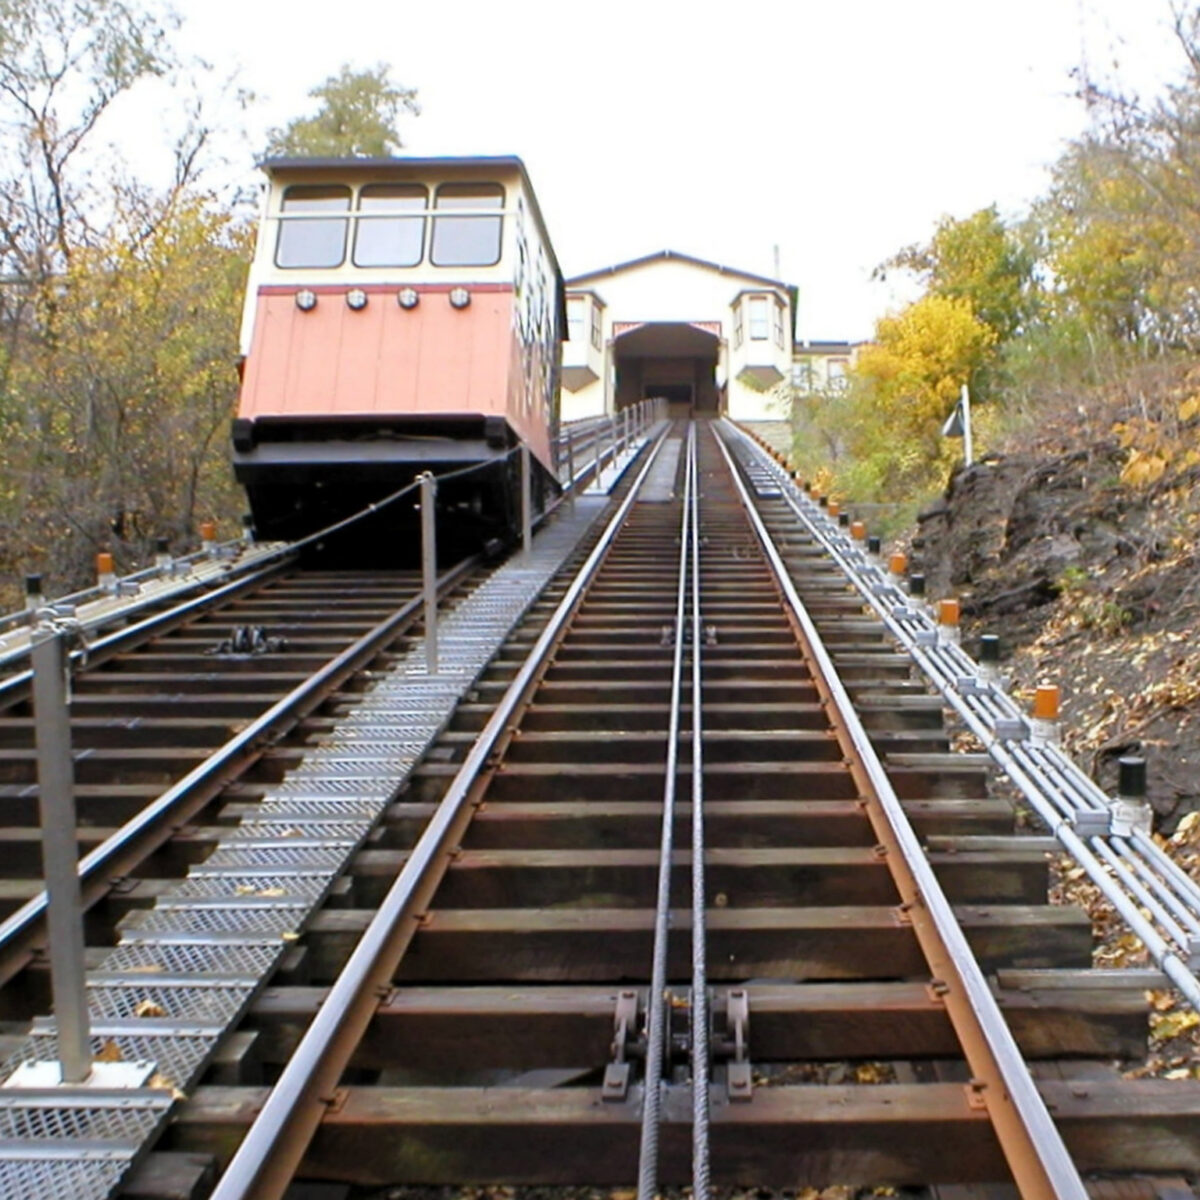 Vans could be used to shuttle riders if Monongahela Incline problems persist, Pittsburgh Regional Transit says